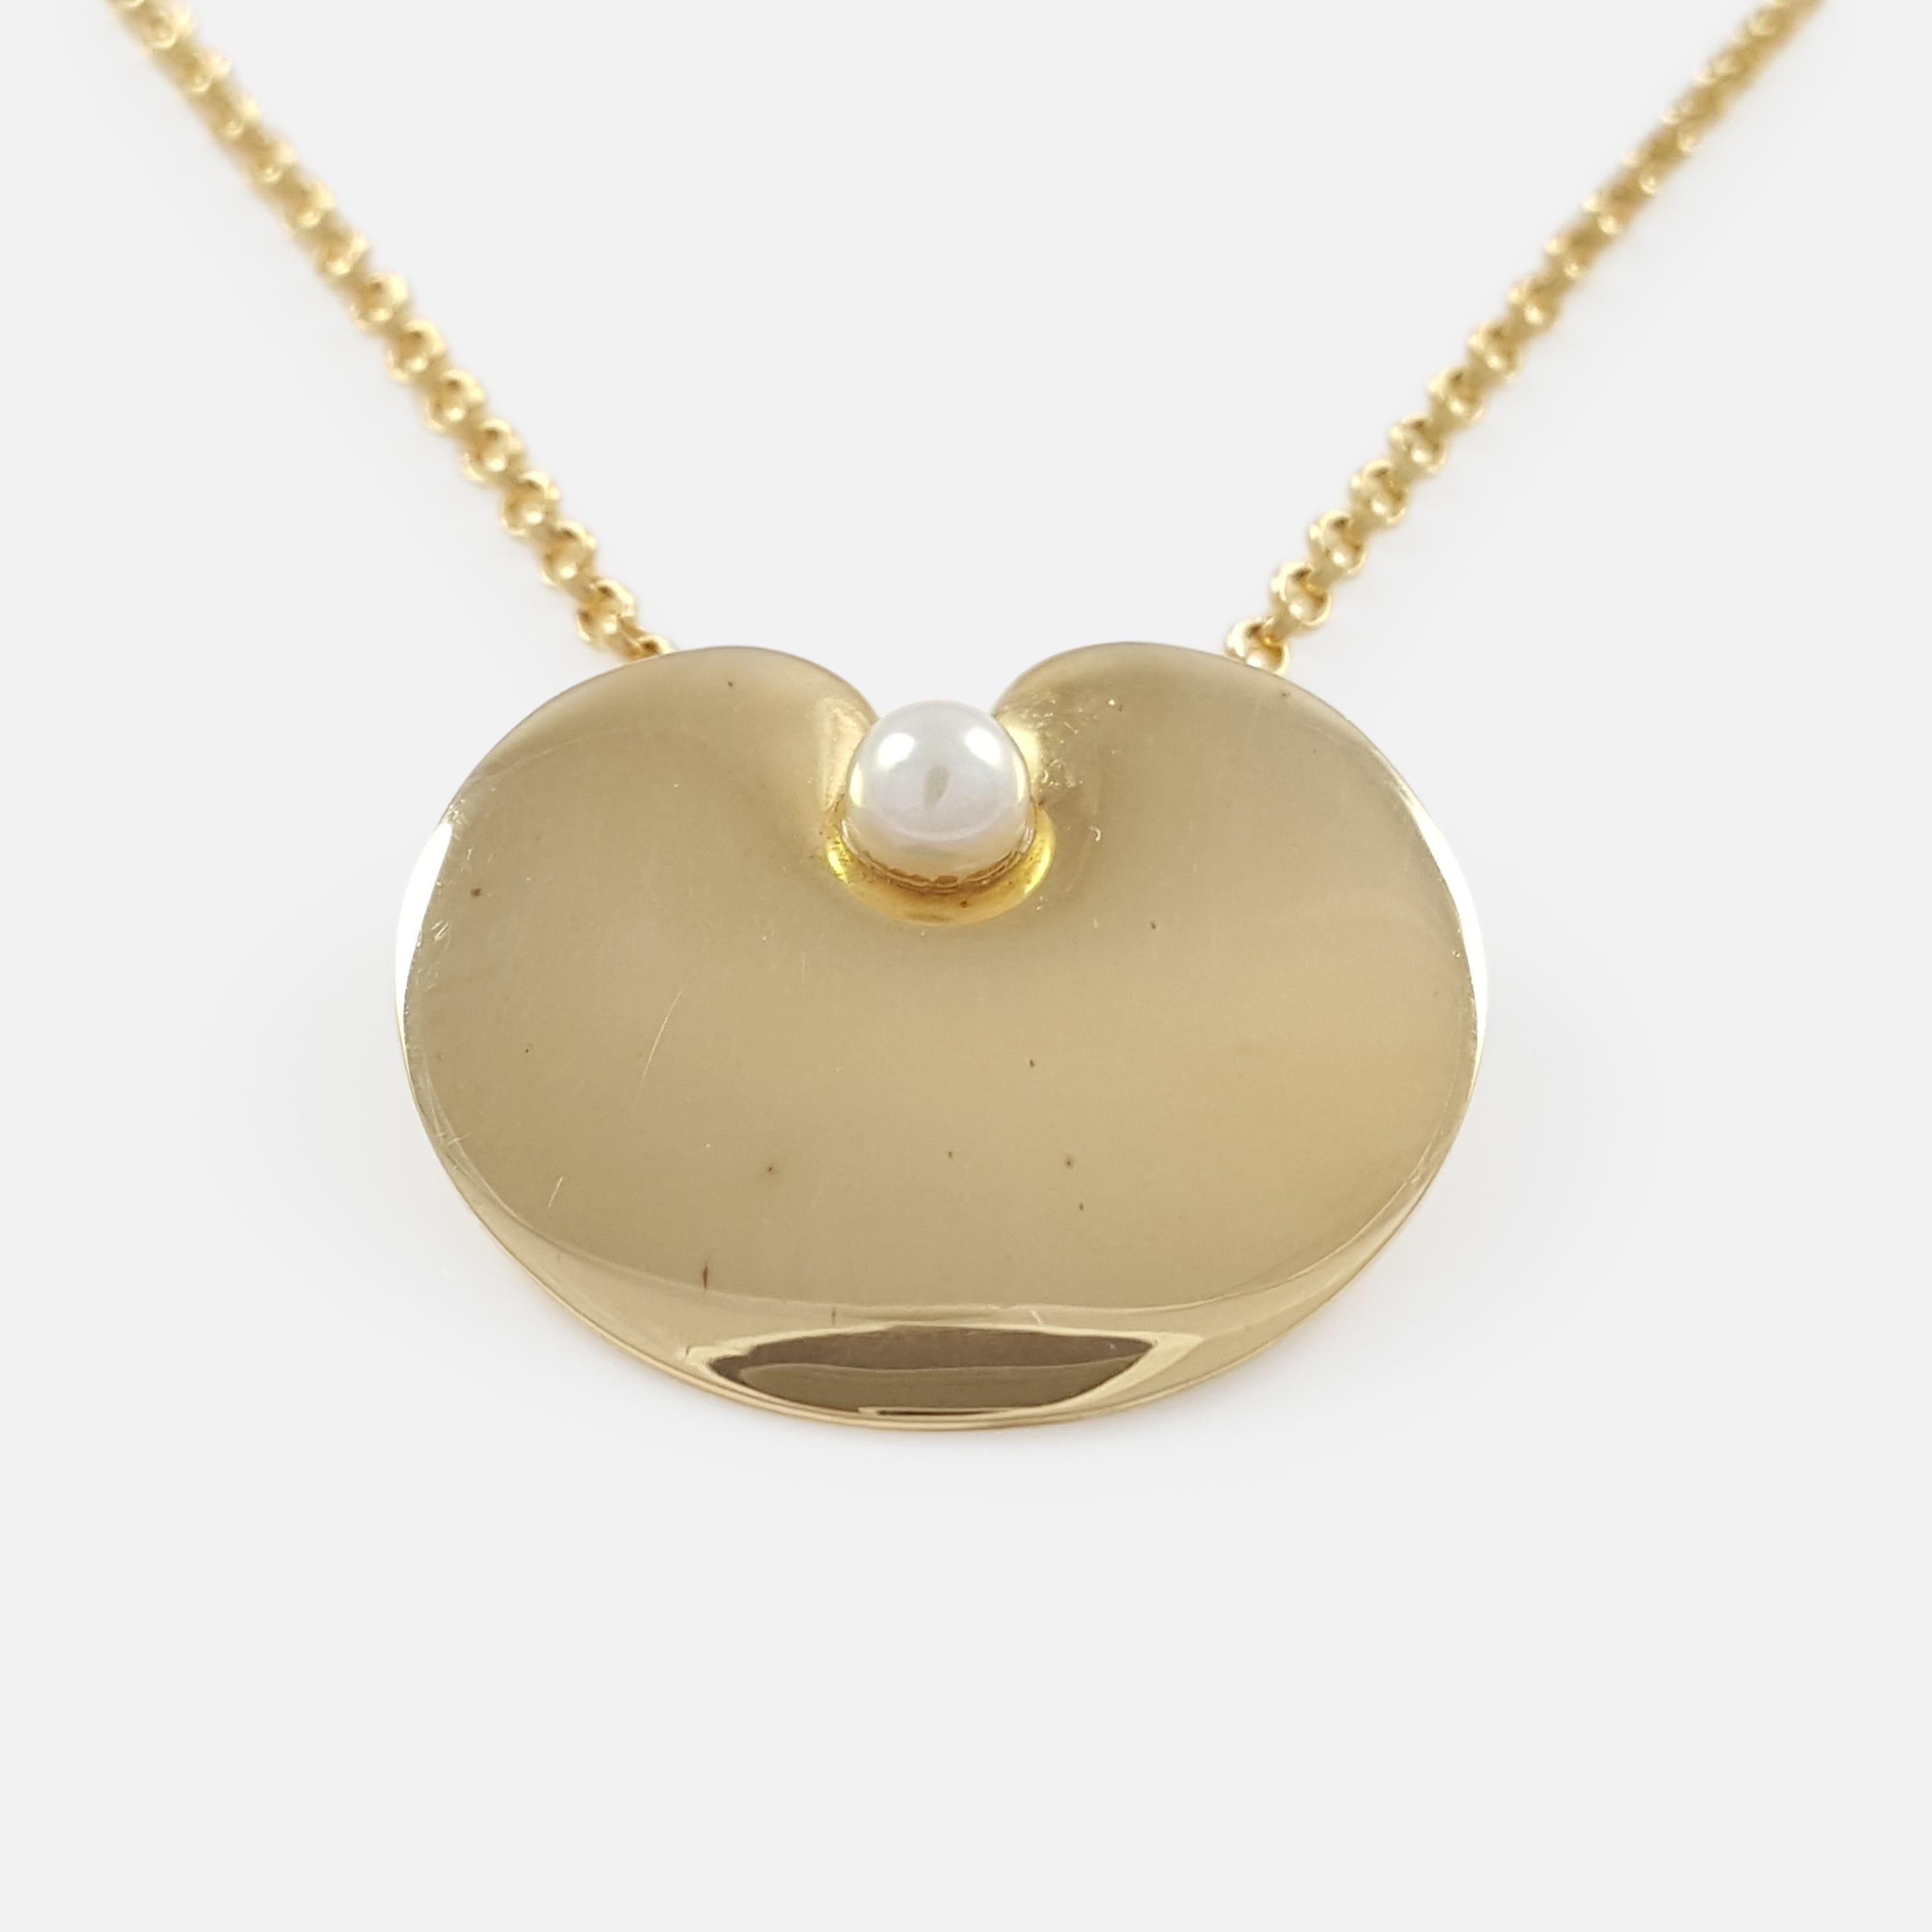 Item: - A superb Georg Jensen 18 karat yellow gold & pearl pendant with original chain. The pendant is designed by Nanna Ditzel for Georg Jensen. Stamped Georg Jensen within dotted oval mark, '750', '1999', 'ND', and 'Denmark'.  The pendant and